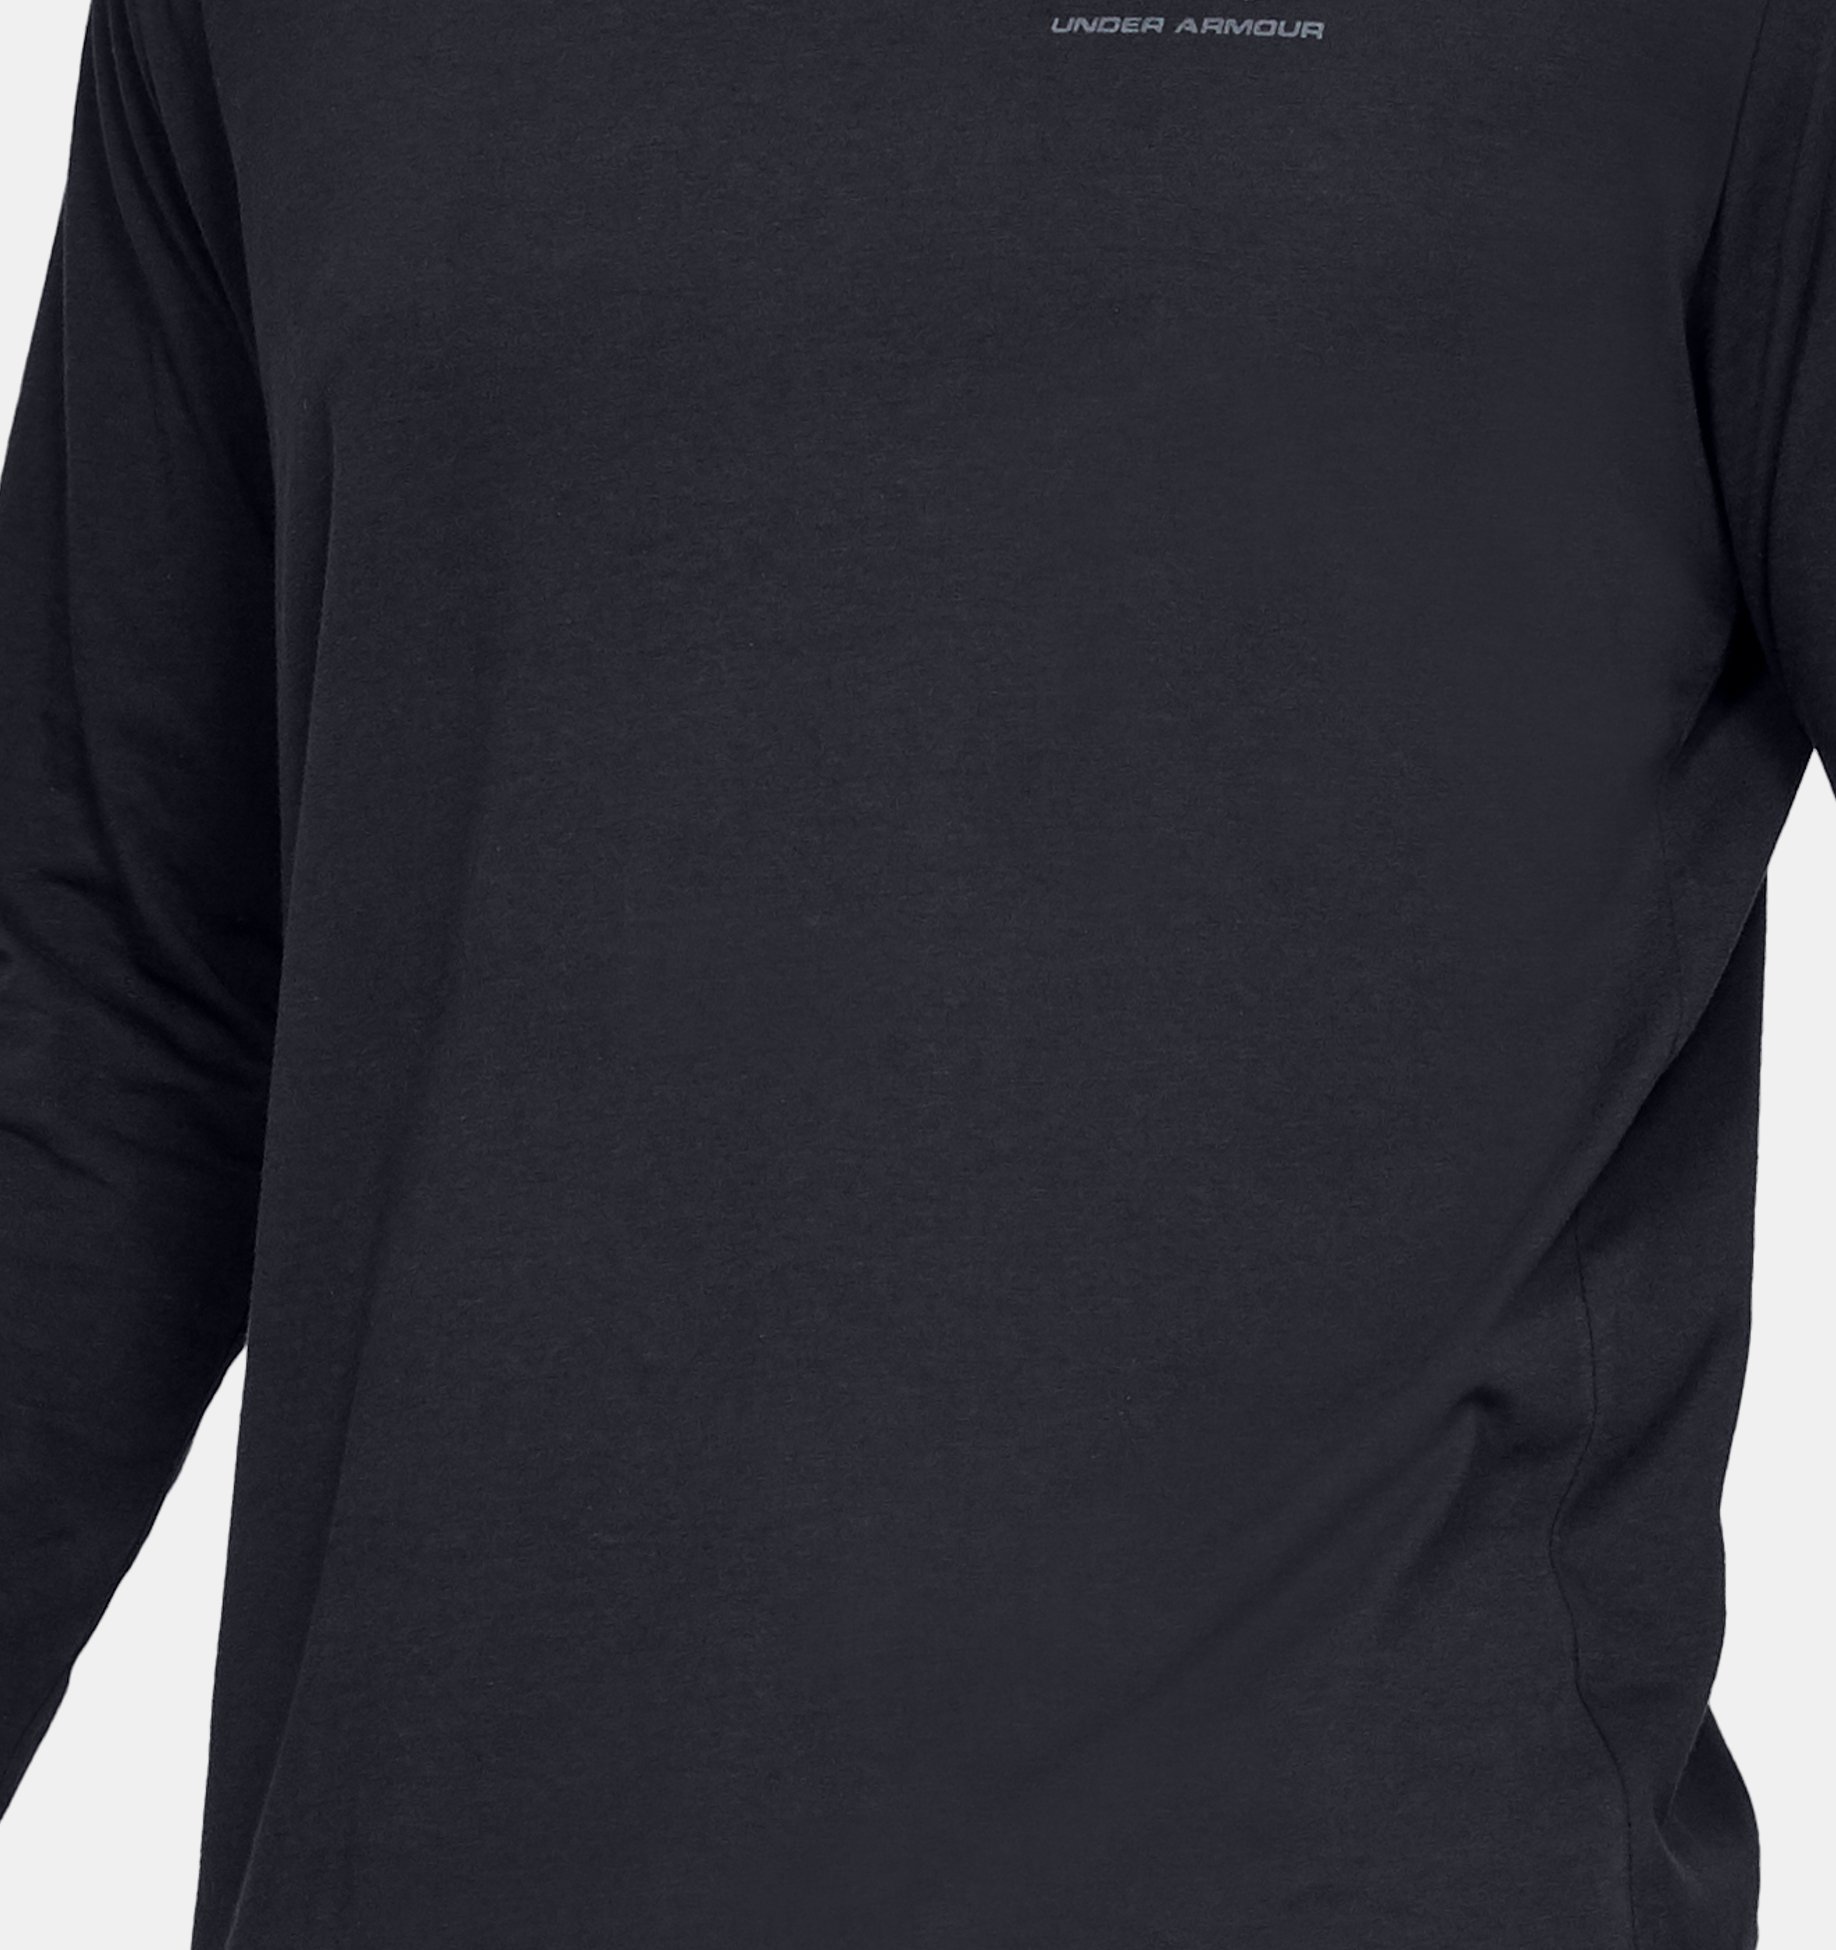 miseria madera Contento Men's UA Sportstyle Left Chest Long Sleeve | Under Armour